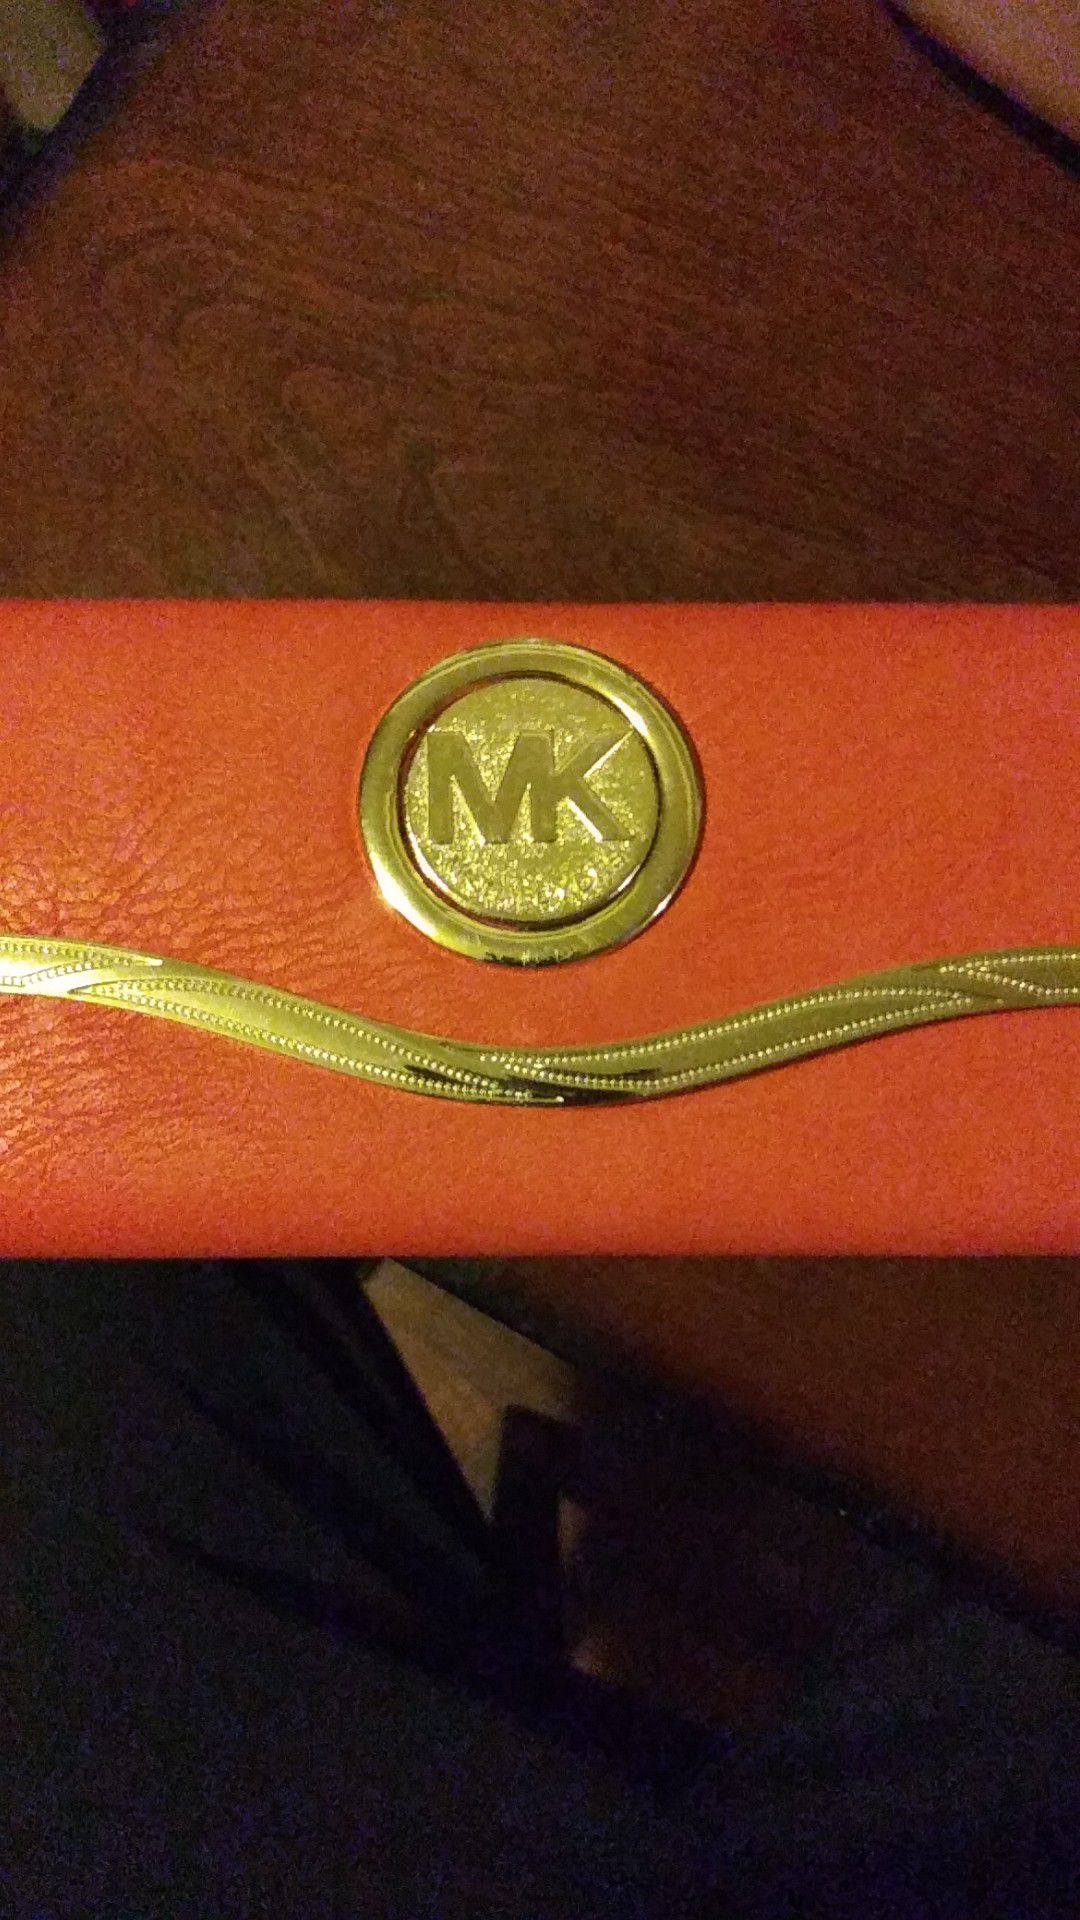 MK wallet authentic serial number available